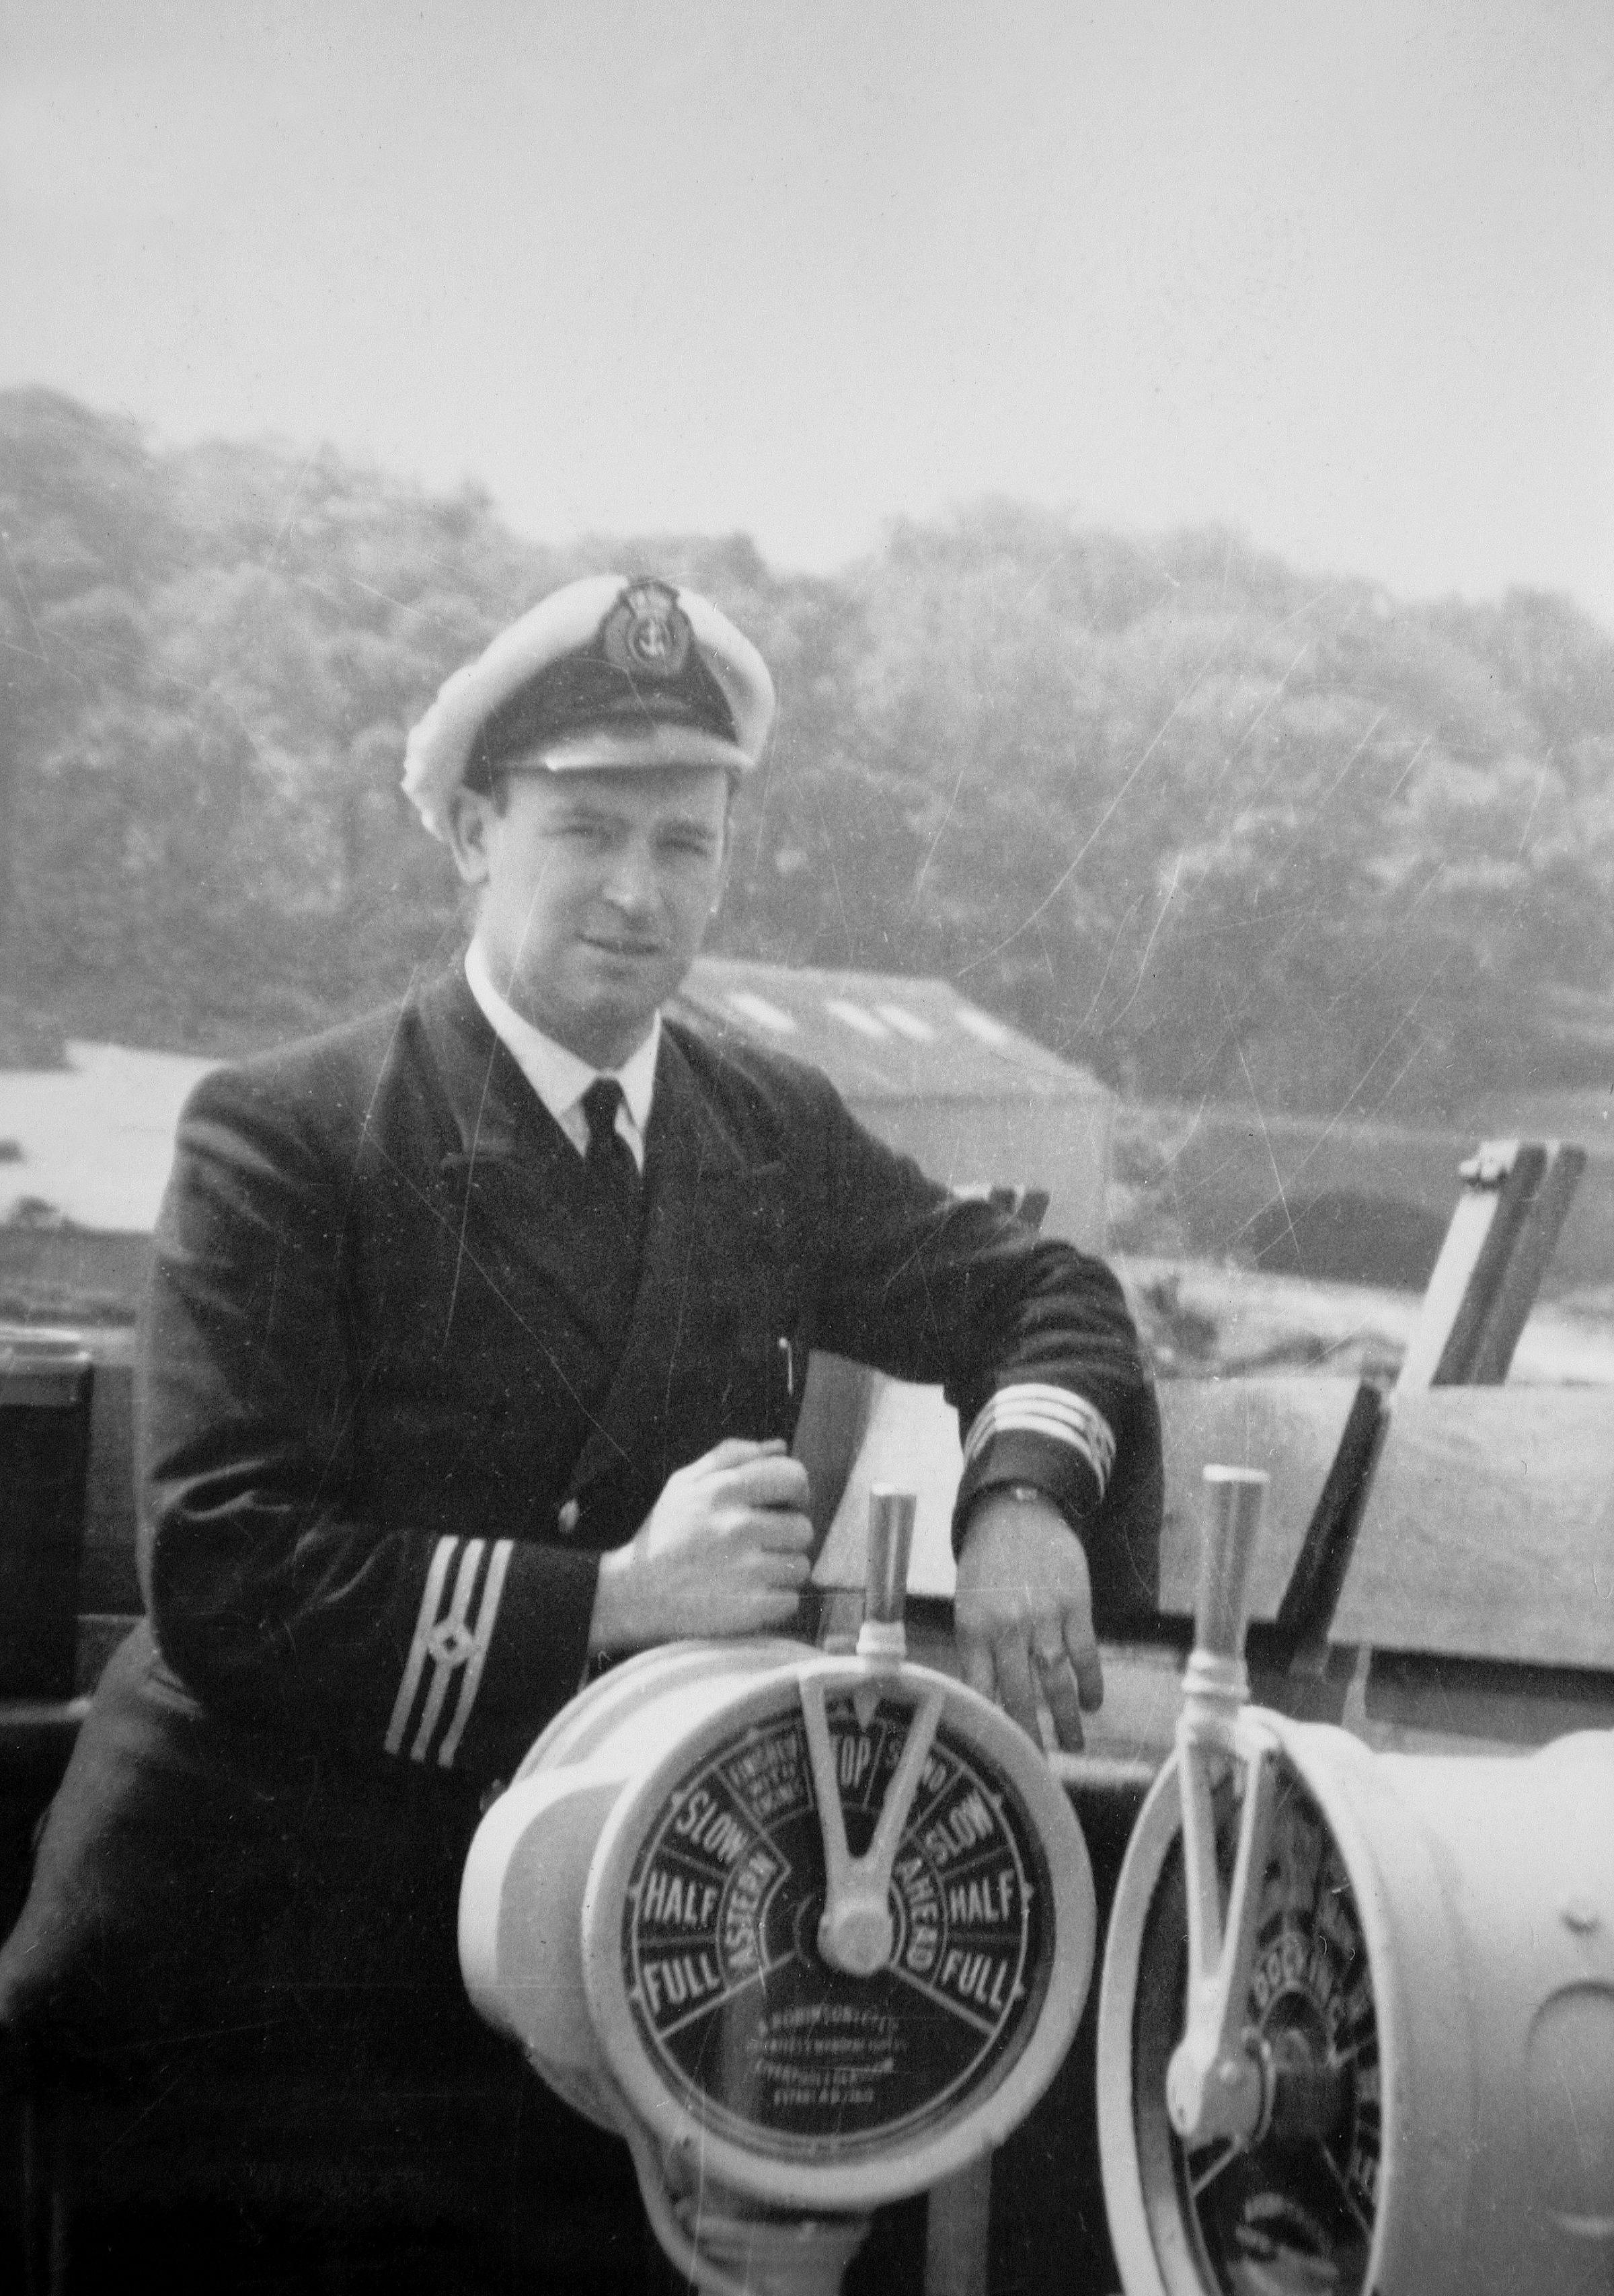 Captain Hutchison c1960 on the PS Caledonia